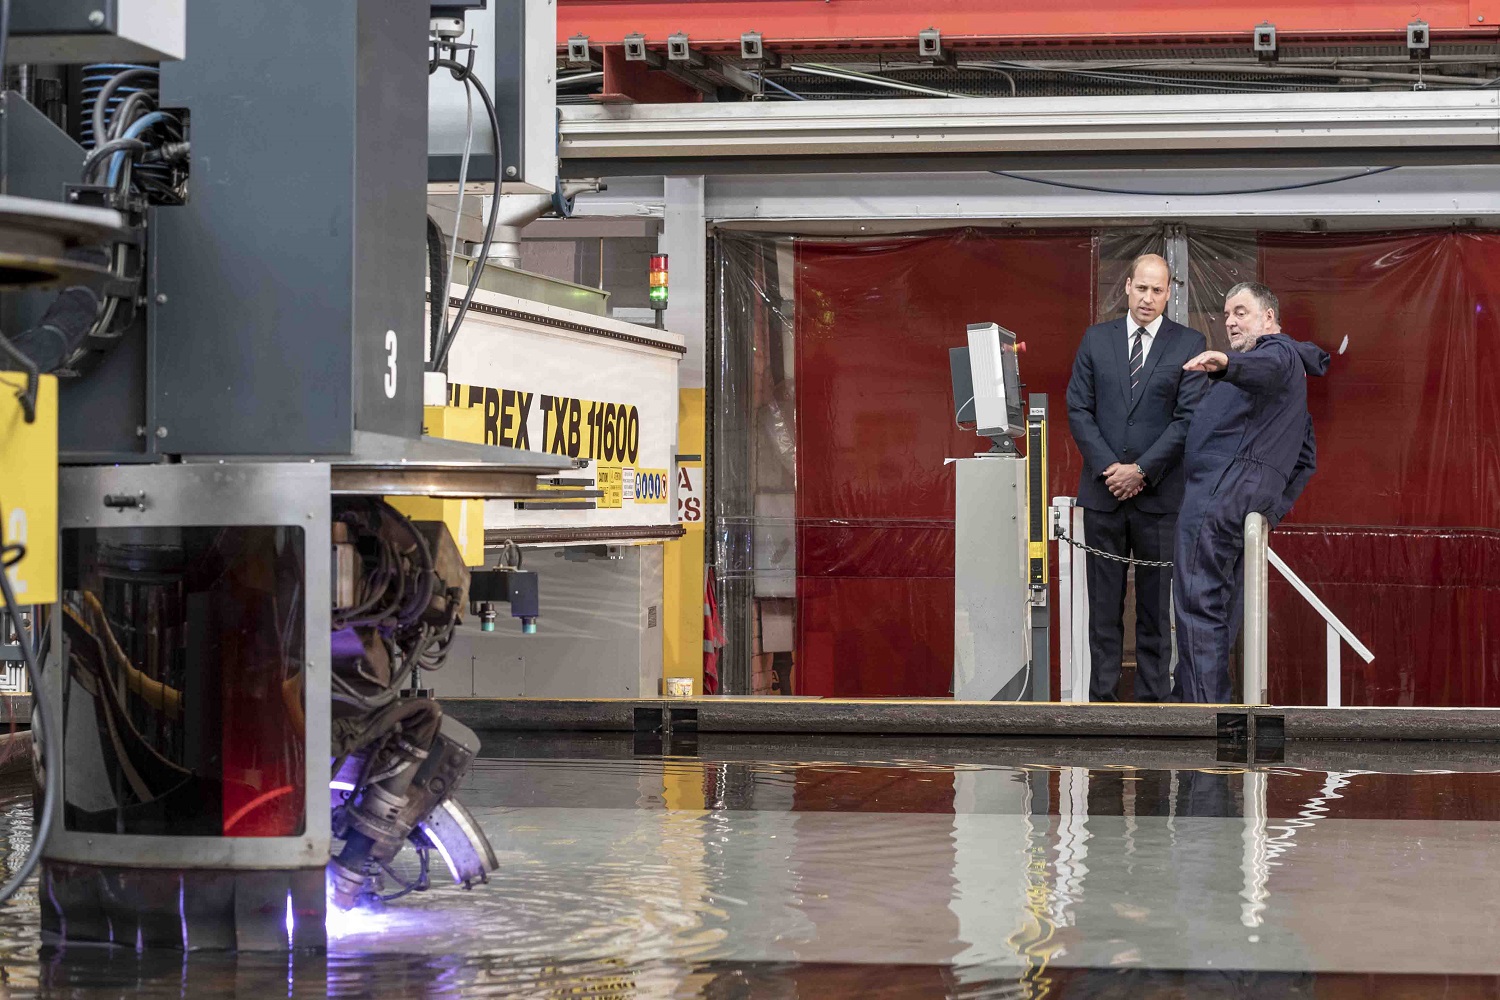 HRH Prince William cut the steel on the new Royal Navy Third Type 26 Frigate HMS Belfast on Tuesday